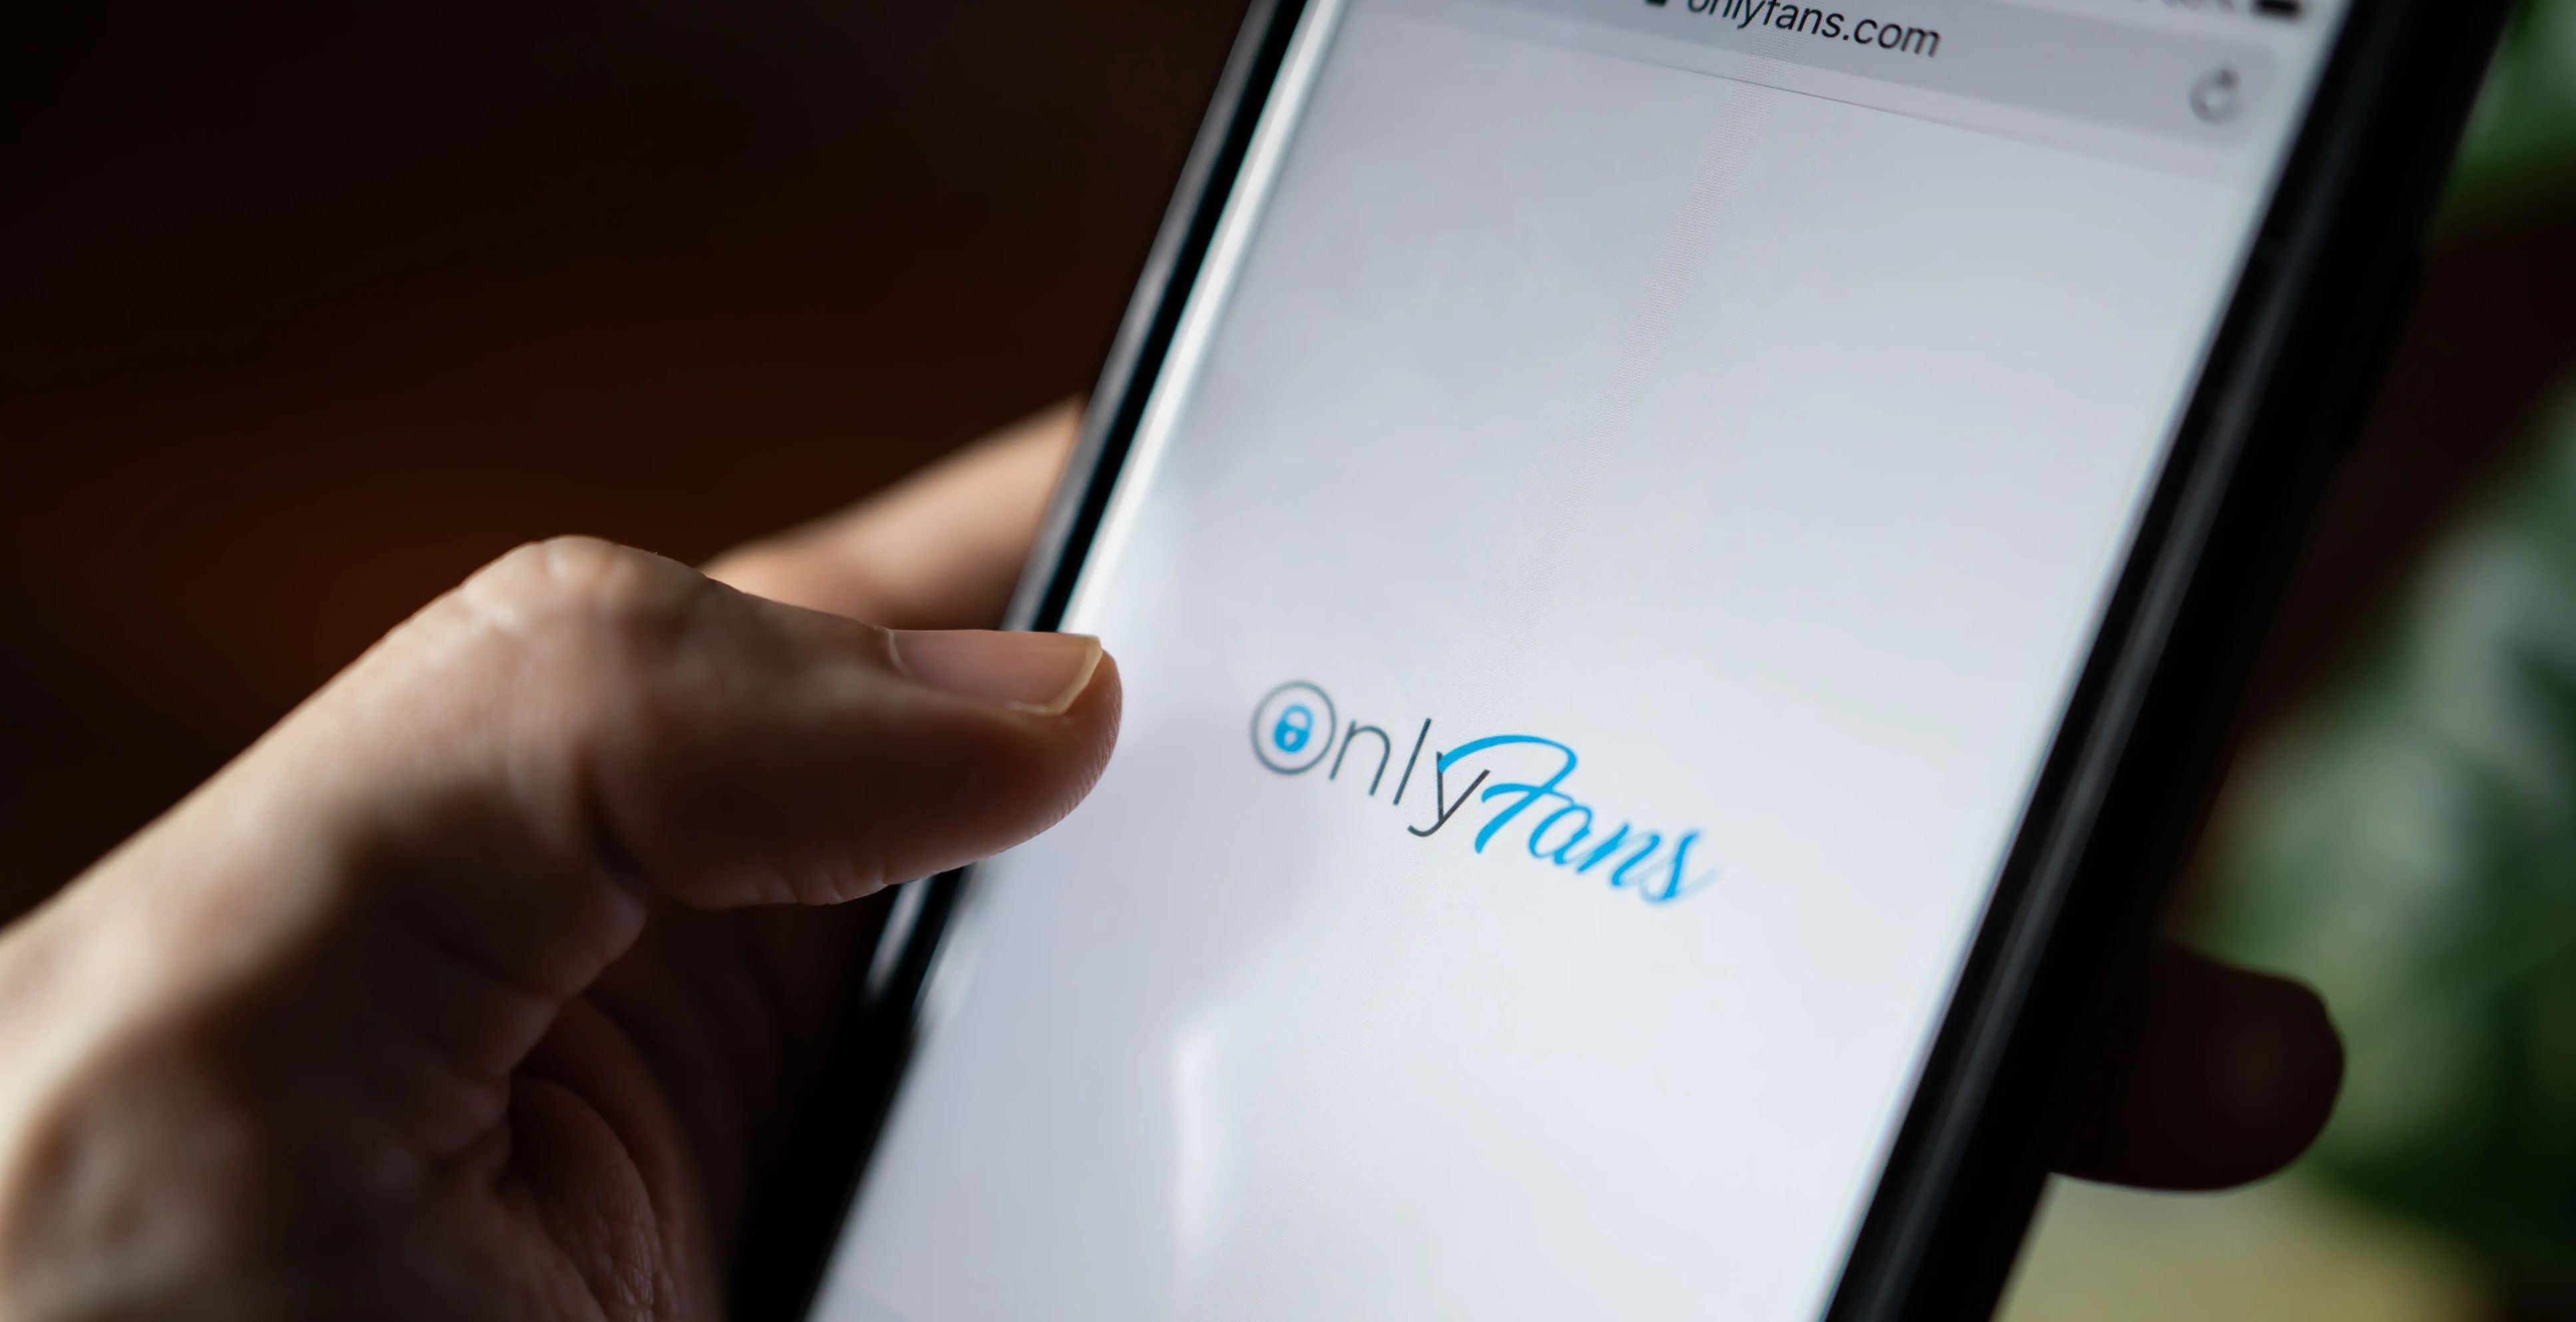 Man browses the OnlyFans website on his phone.